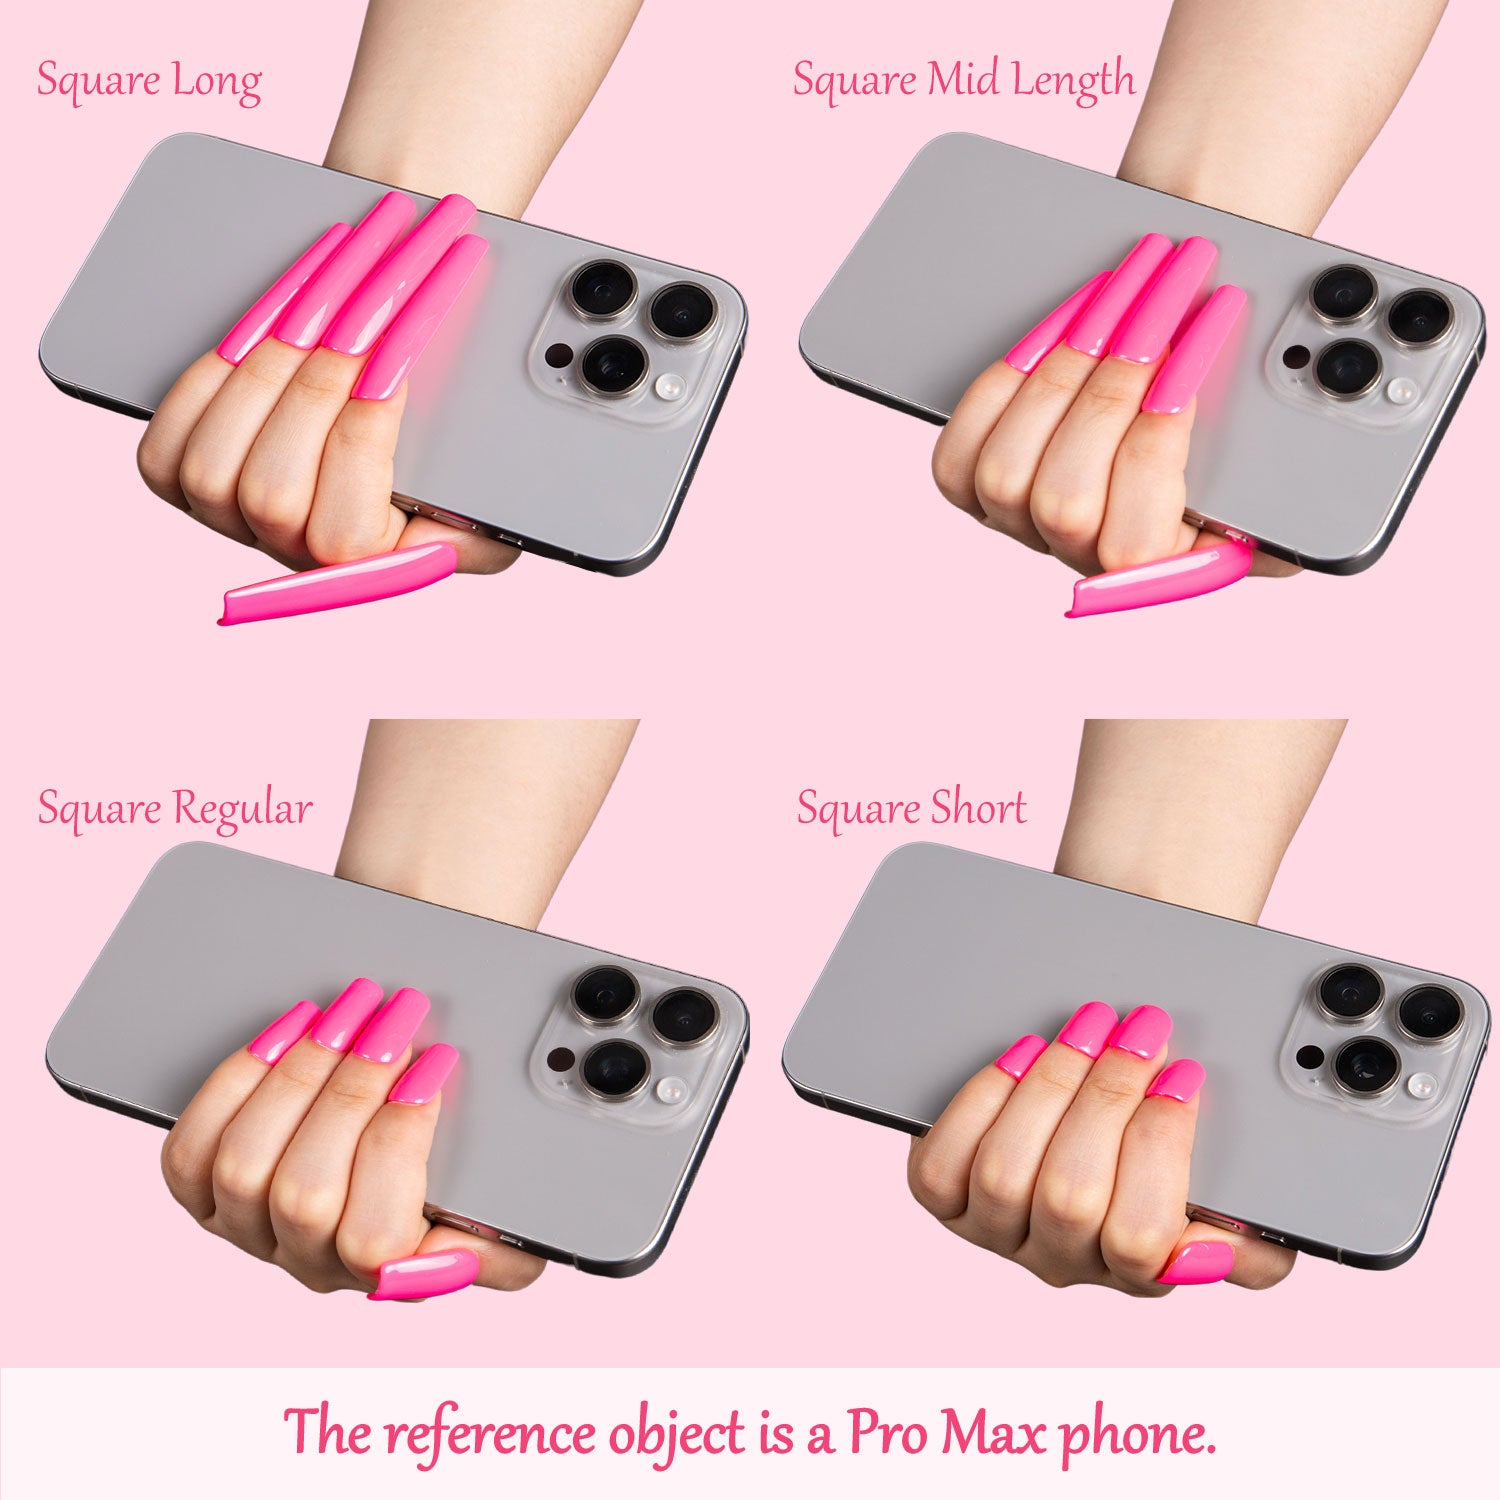 Comparison of press-on nails in square shapes and different lengths (long, mid length, regular, short) on hands holding a Pro Max phone.